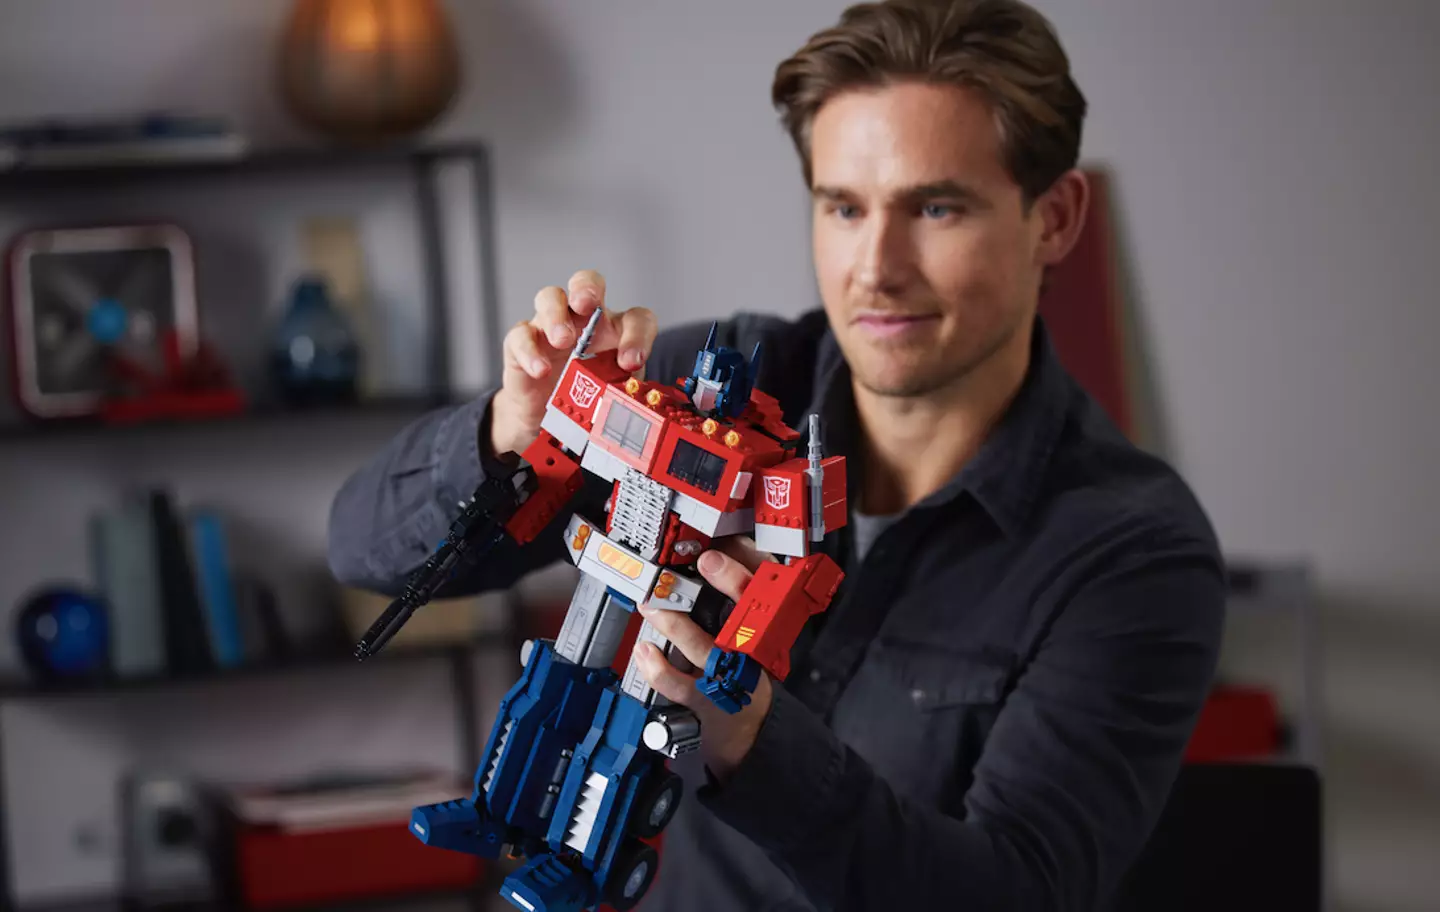 Yep, Lego Prime is a whopper, alright /